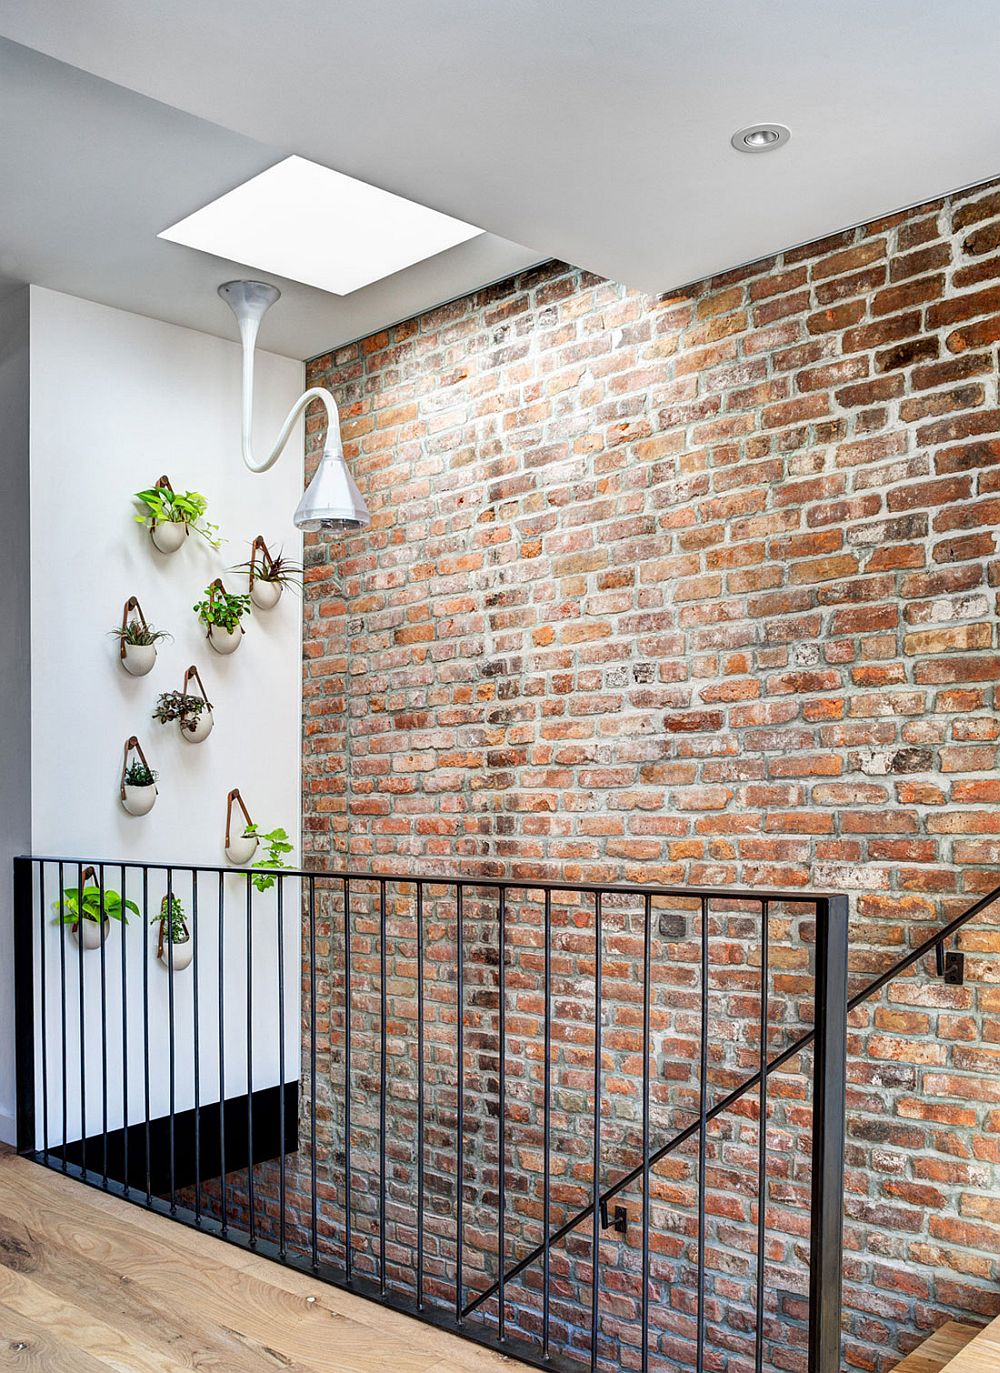 Gorgeous wall planters next to the staircase with skylight above